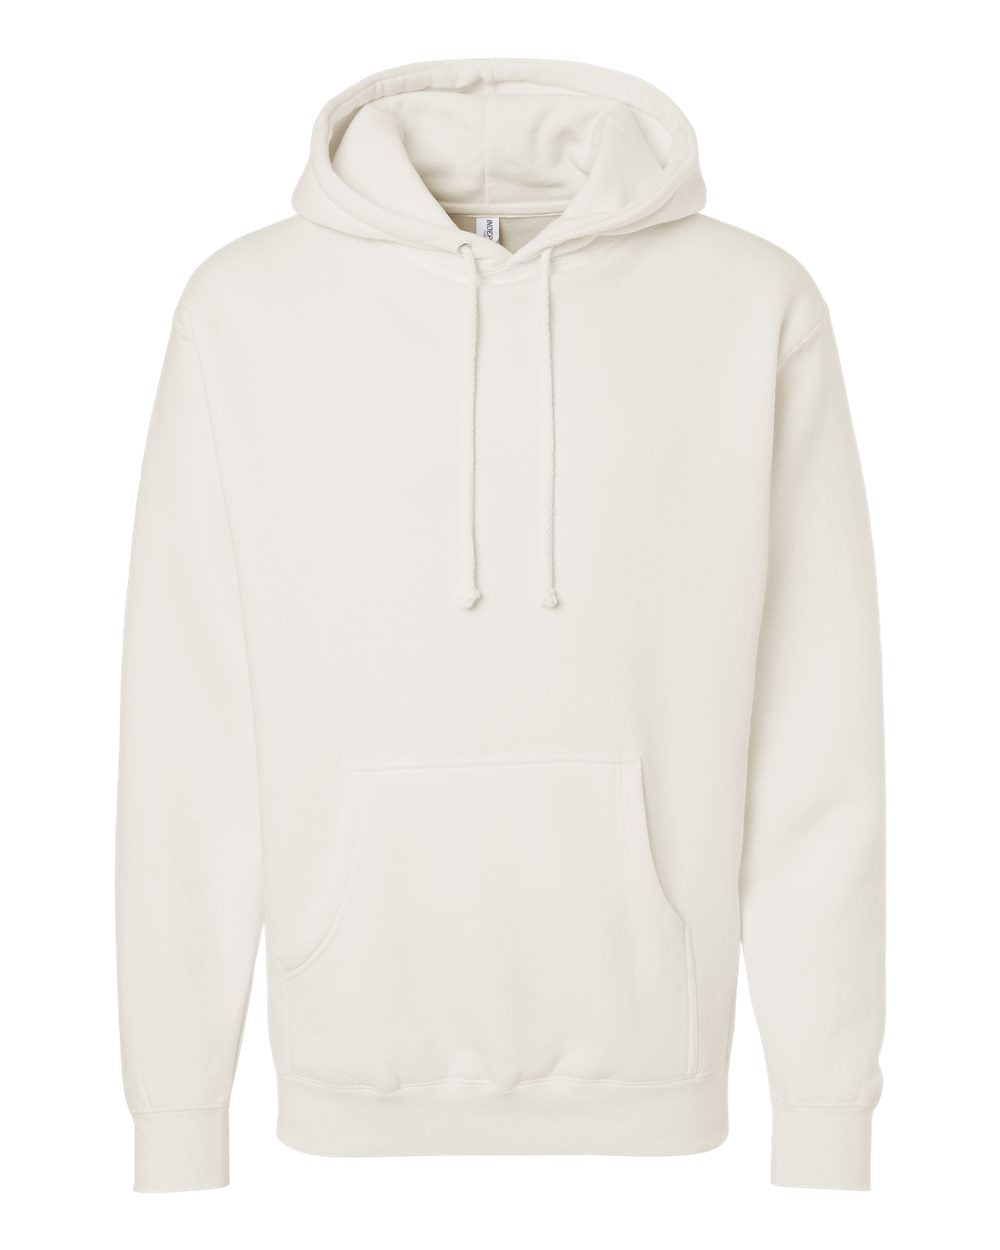 Independent Trading Co. - Heavyweight Hooded Sweatshirt - IND4000-XS - 5XL